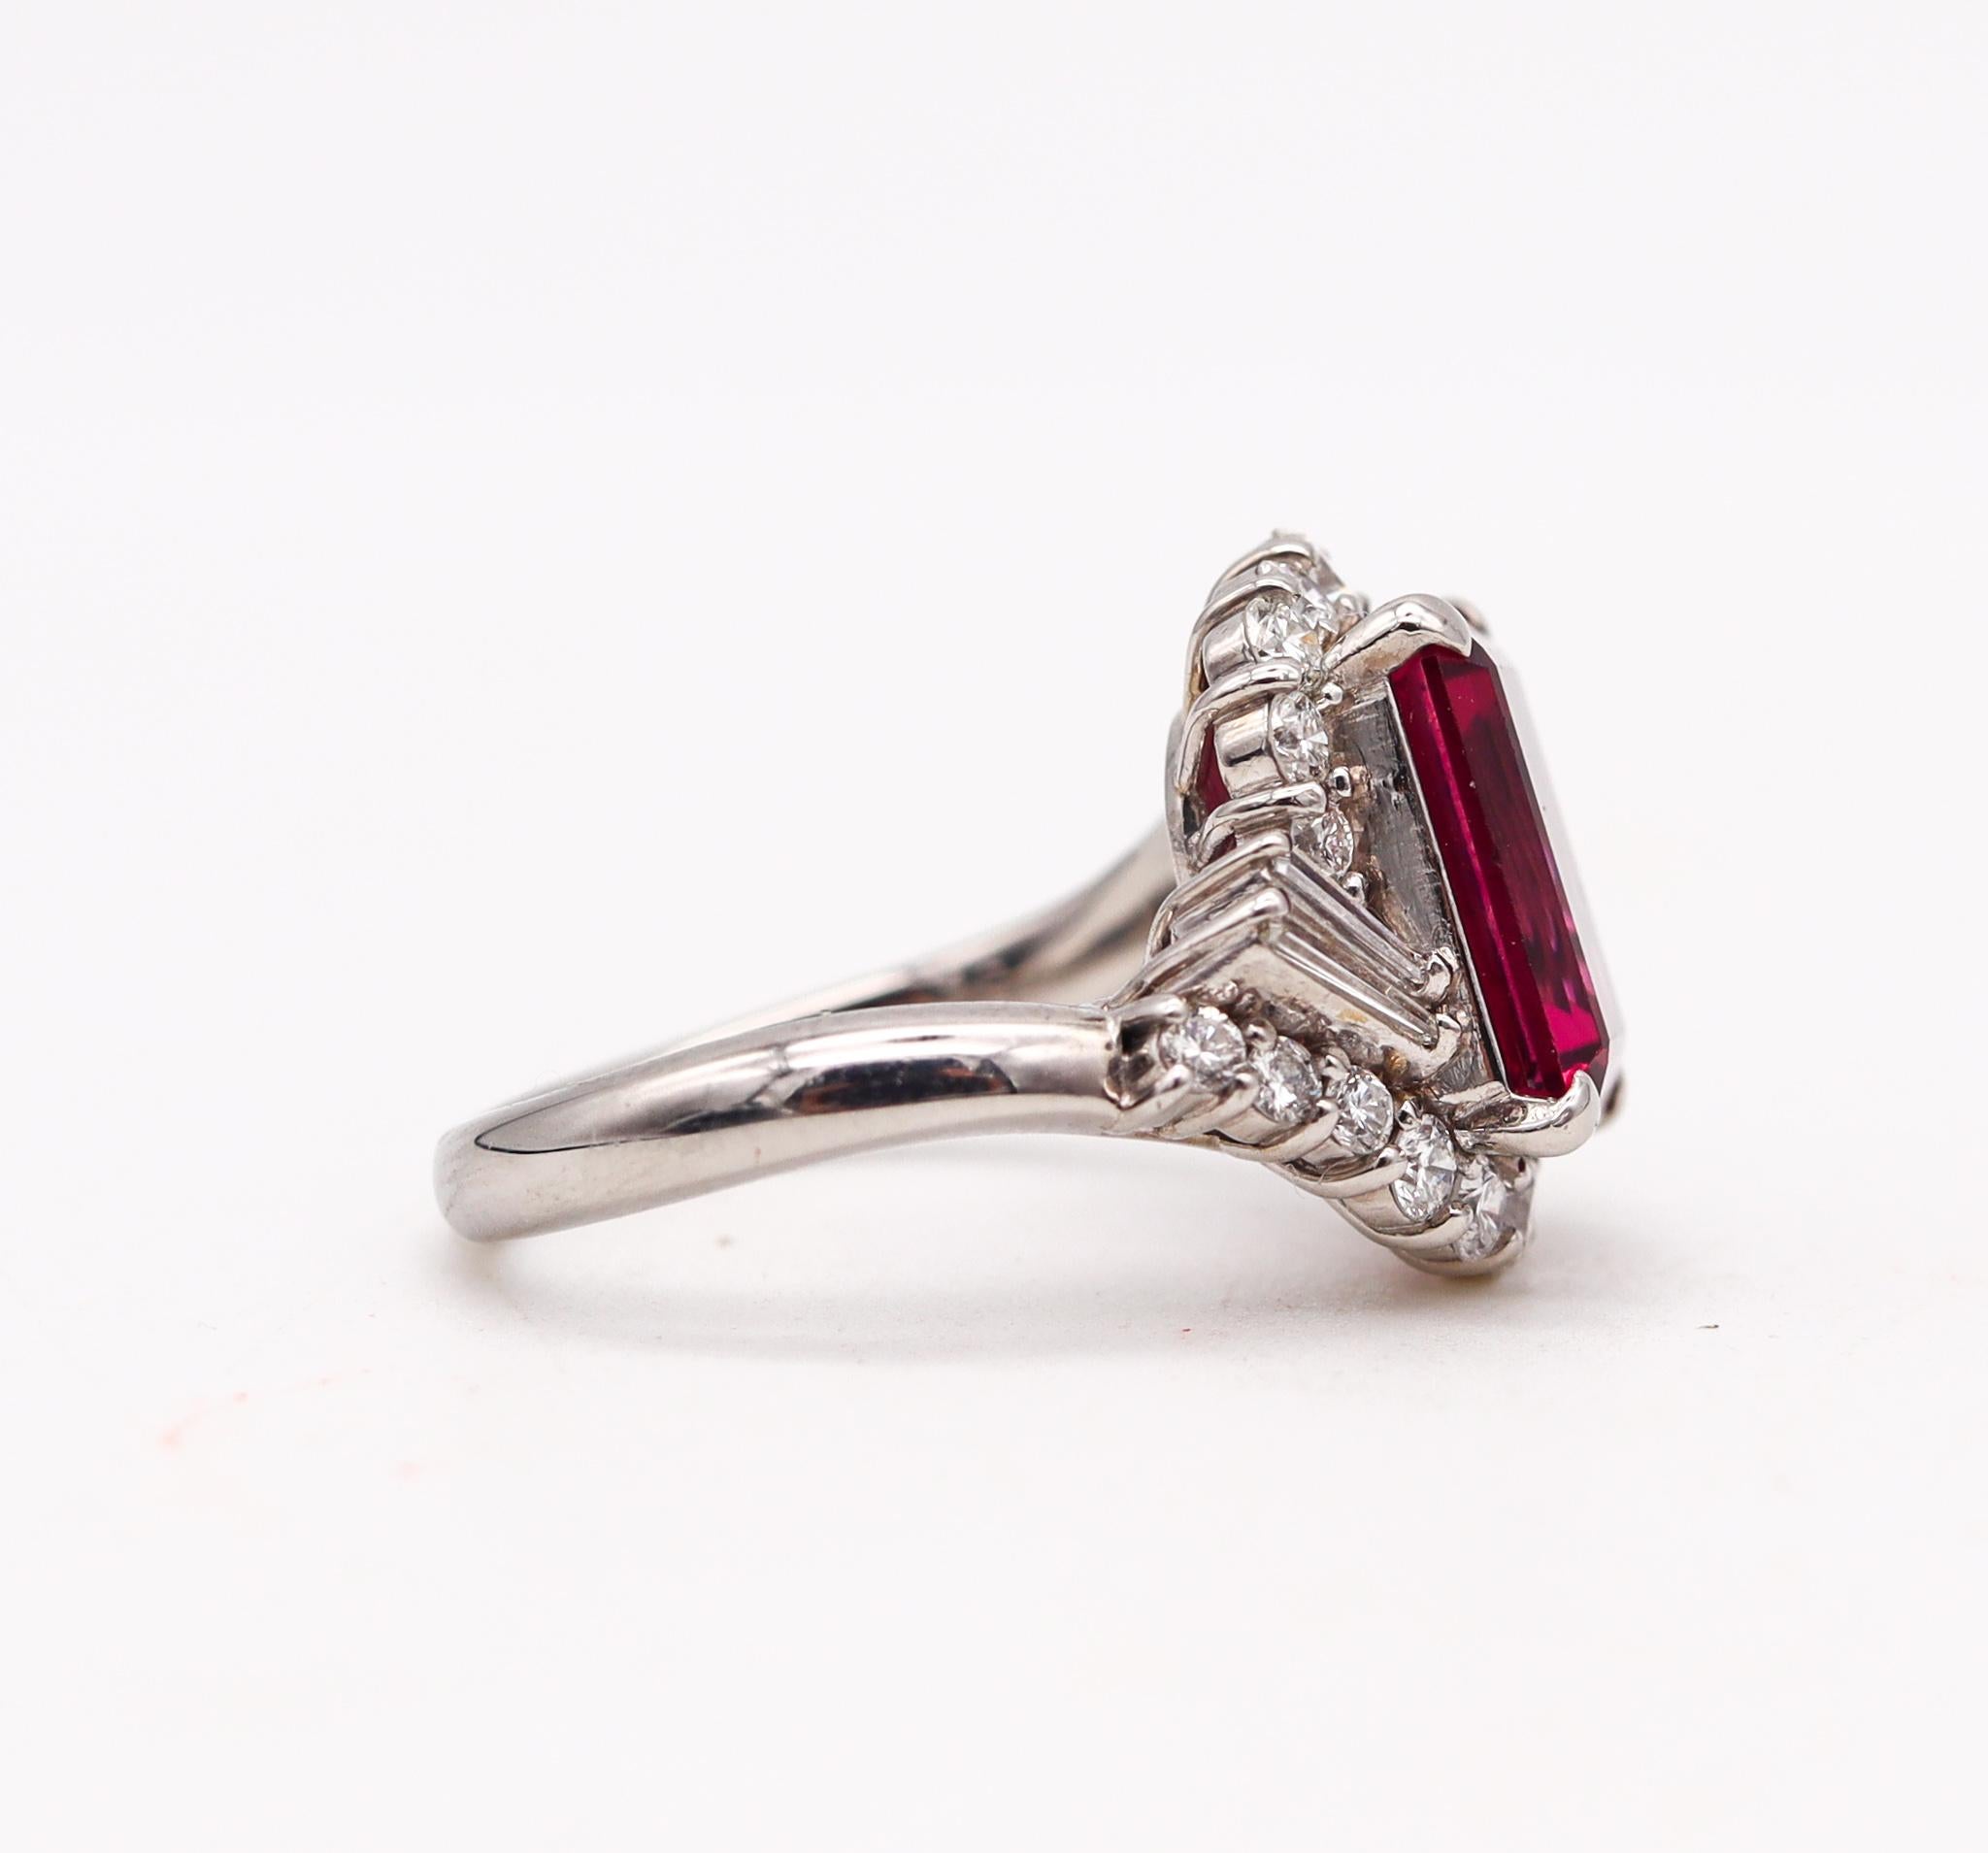 Emerald Cut Contemporary Cocktail Ring in Platinum with 6.69 Cts in Diamonds & Rubellite